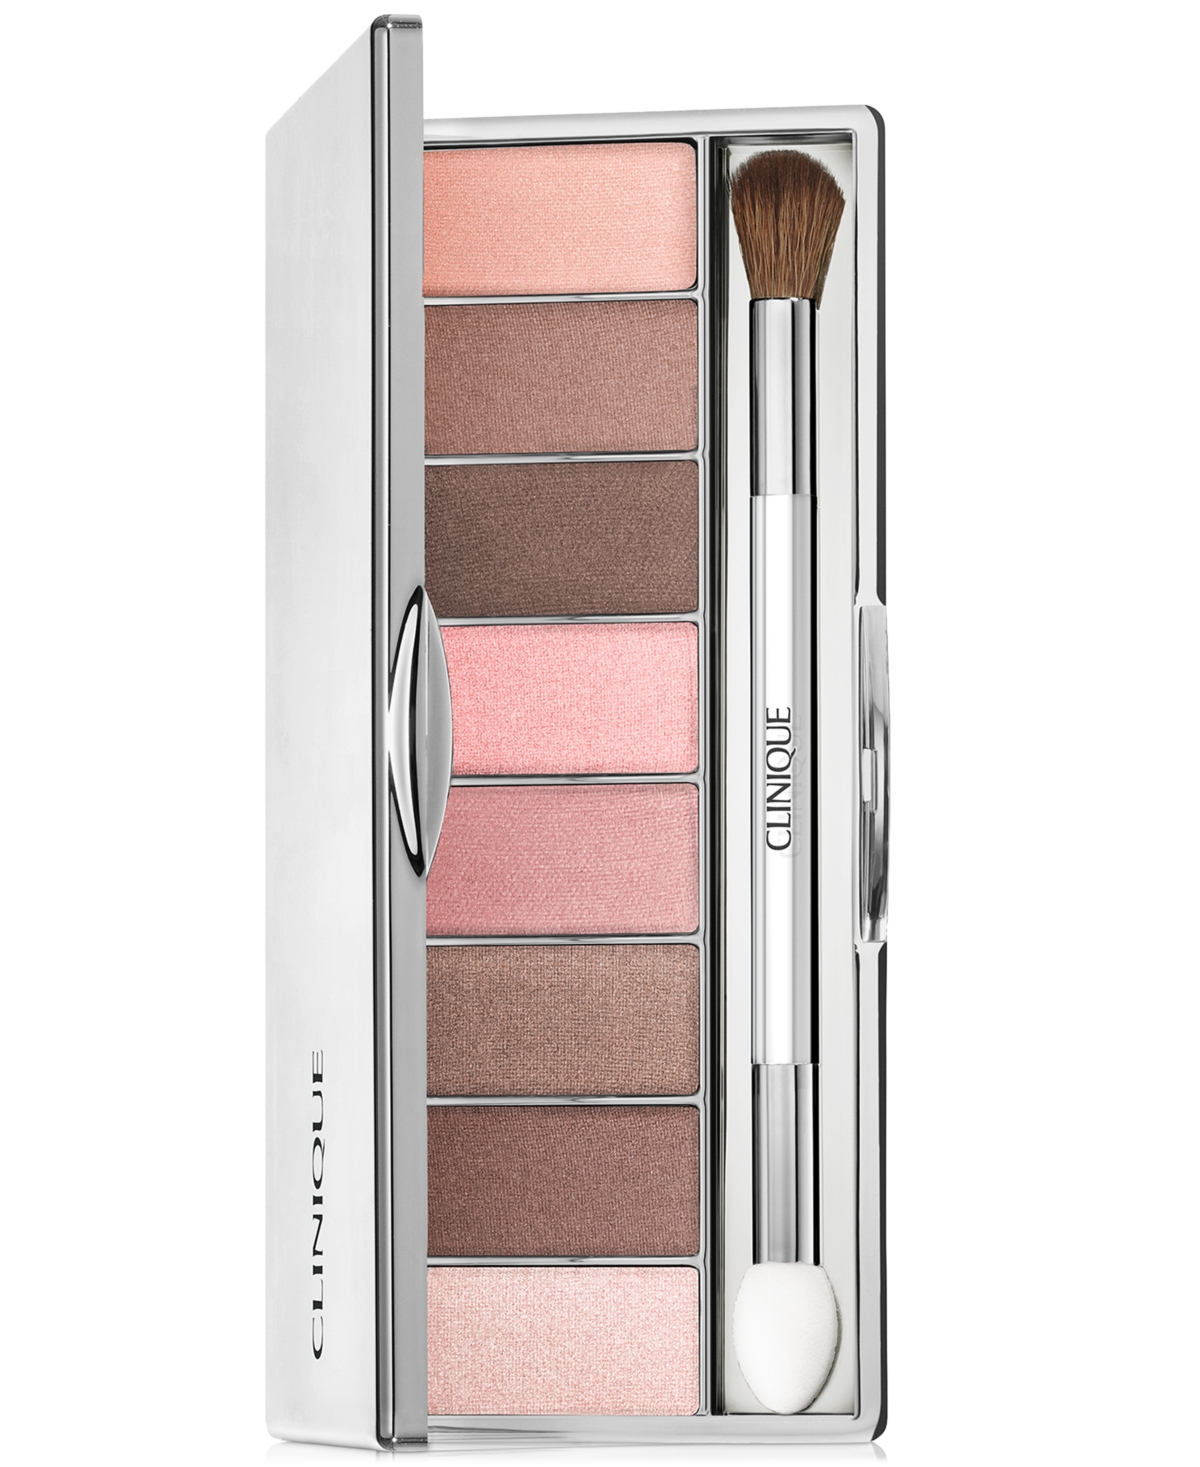 All About Shadow Octet Eyeshadow Palette - Pink Honey, 0.31 oz. - Pink Honey